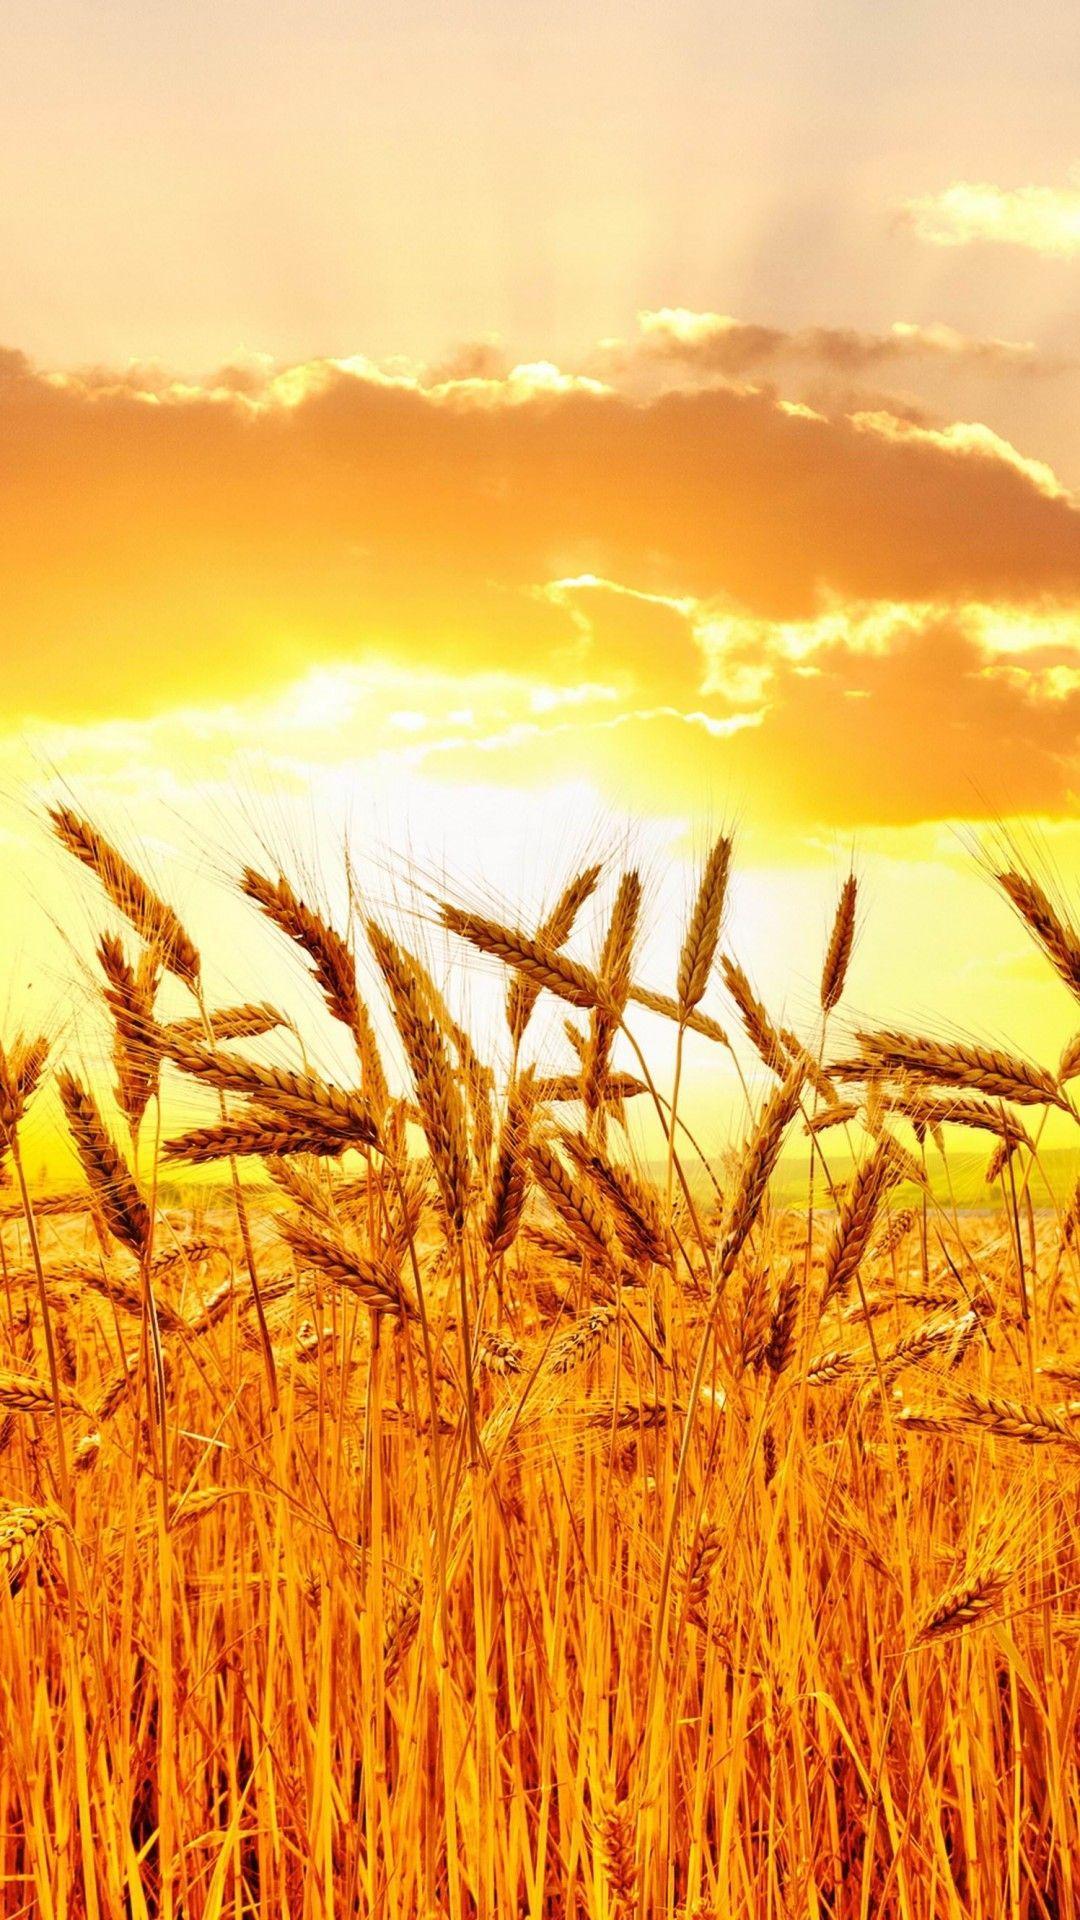 Golden Wheat Field At Sunset Wallpaper for SAMSUNG Galaxy S5. Phone